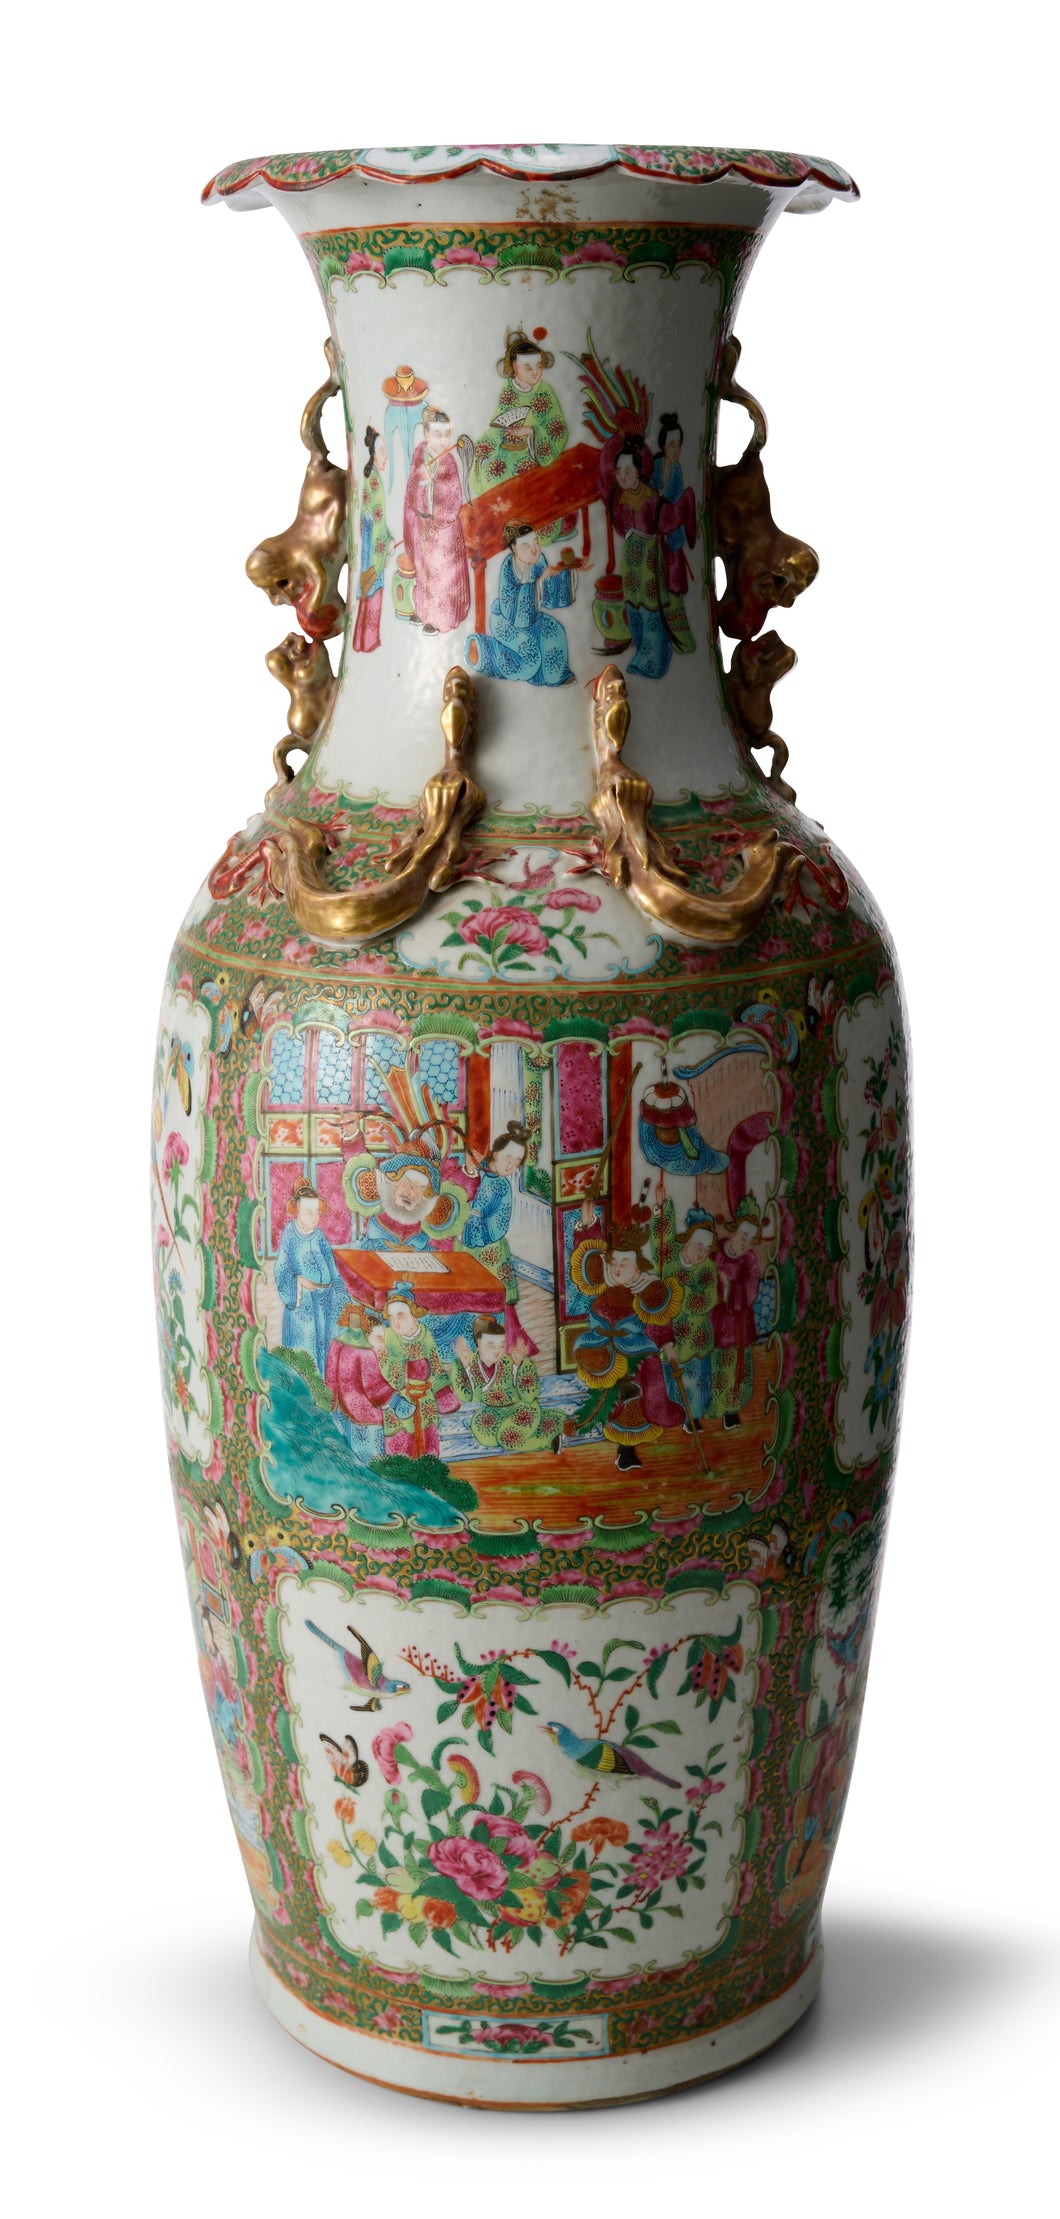 A LARGE CHINESE CANTON FAMILLE ROSE VASE QING DYNASTY (1644-1912), 19TH CENTURY